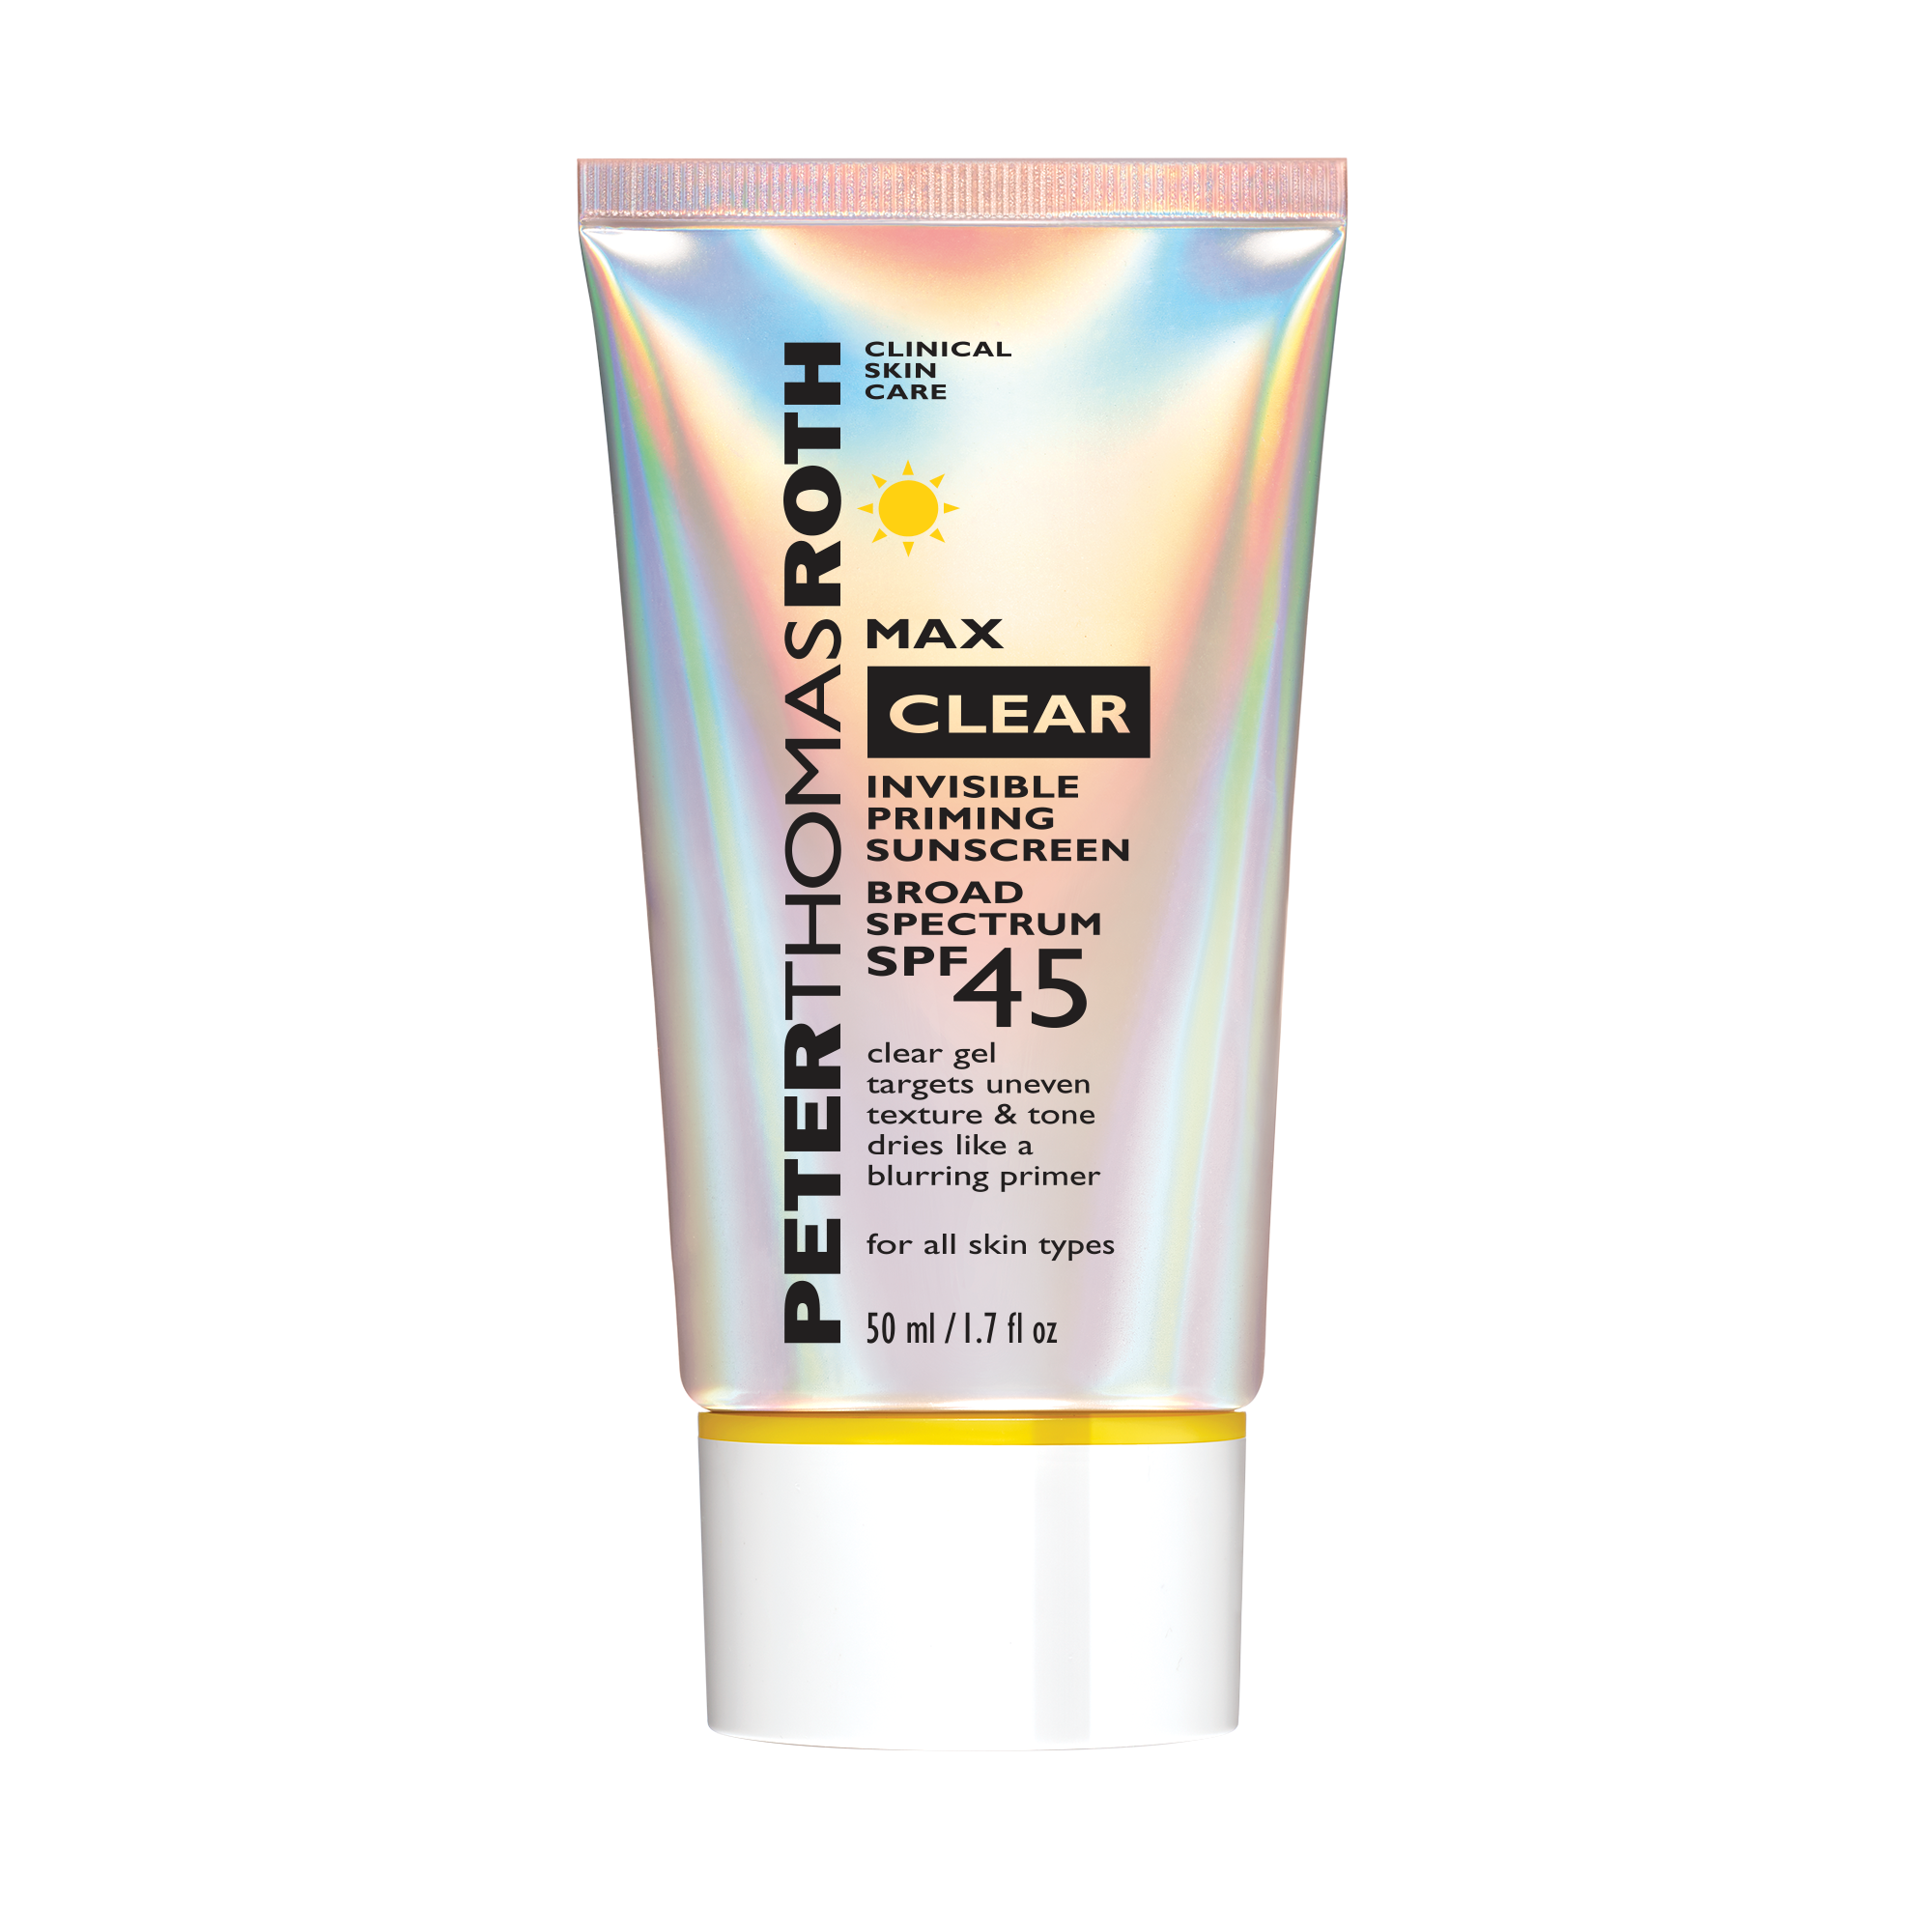 Max Clear Invisible Priming Sunscreen Broad Spectrum SPF 45